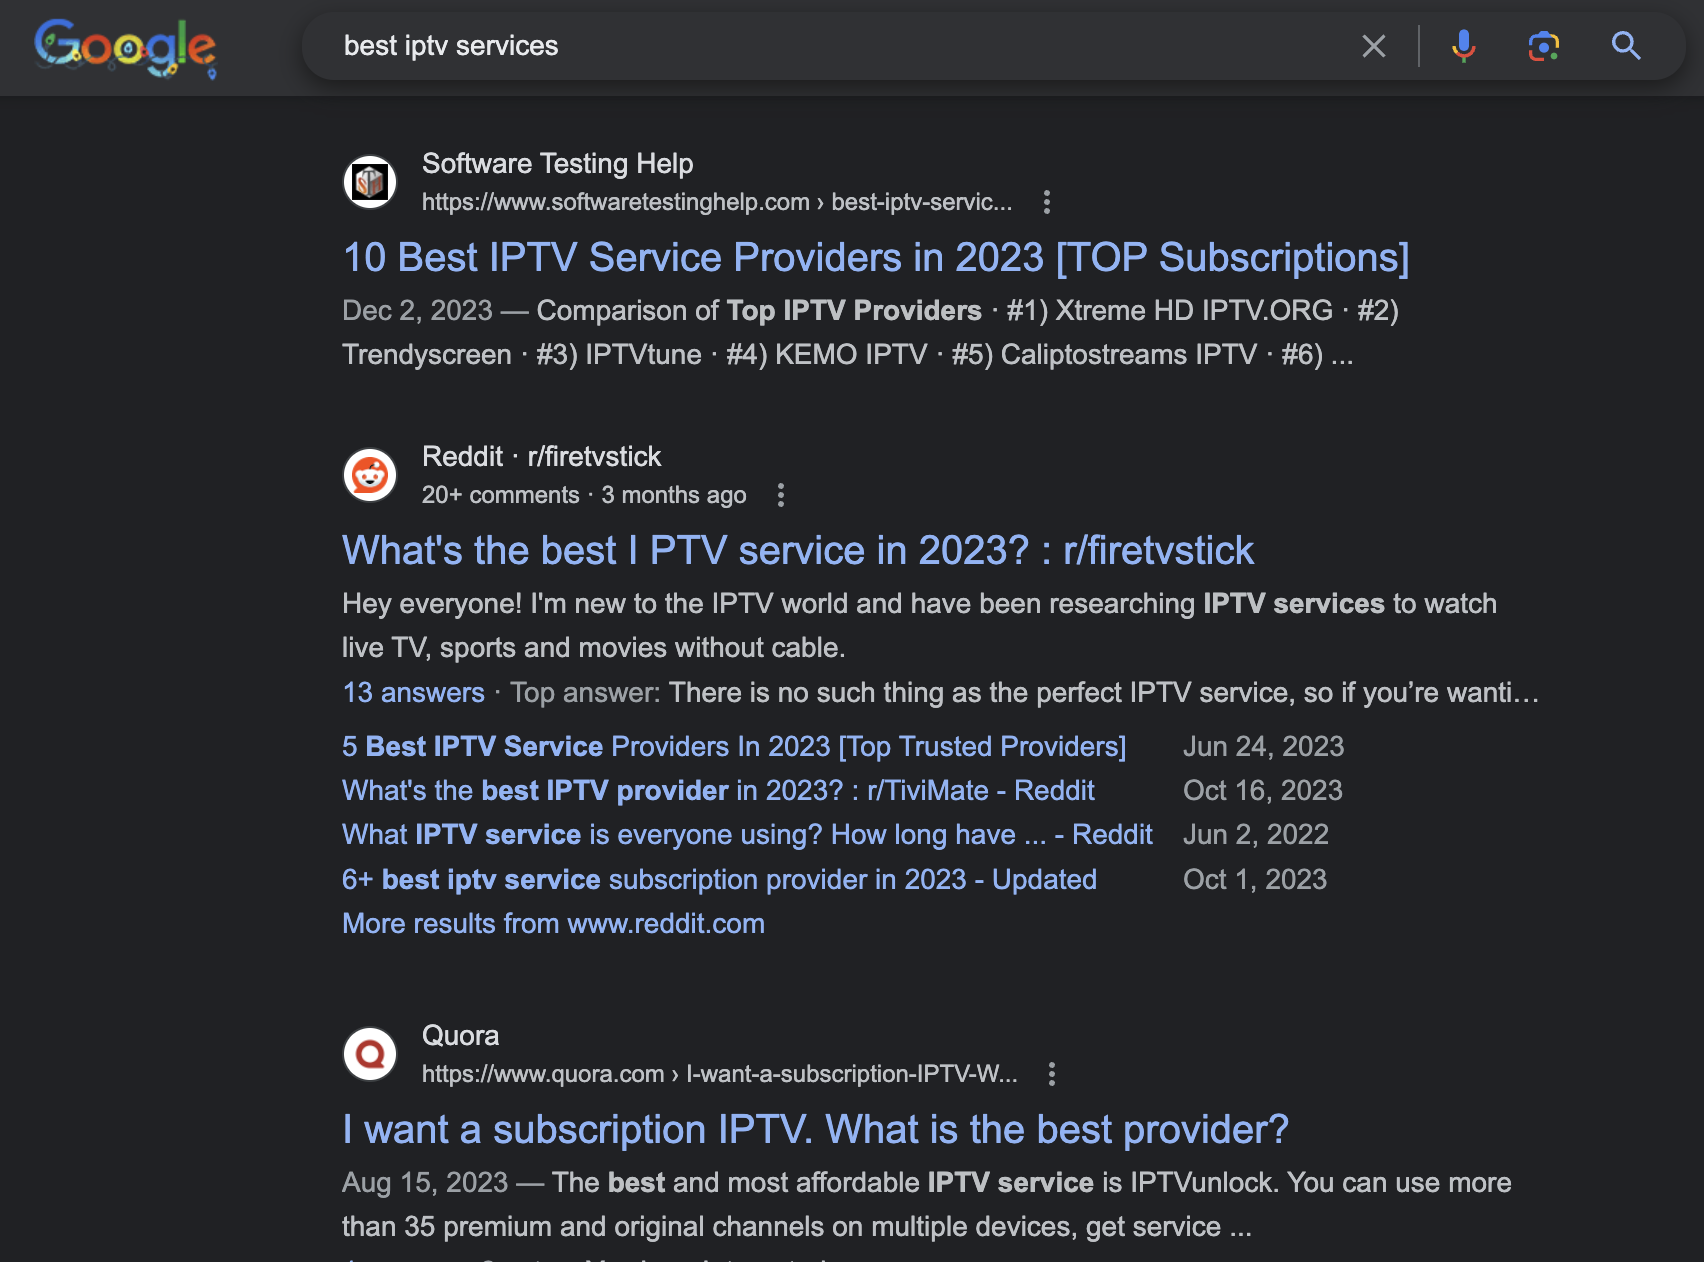 Google Search Results for "Best IPTV Services"